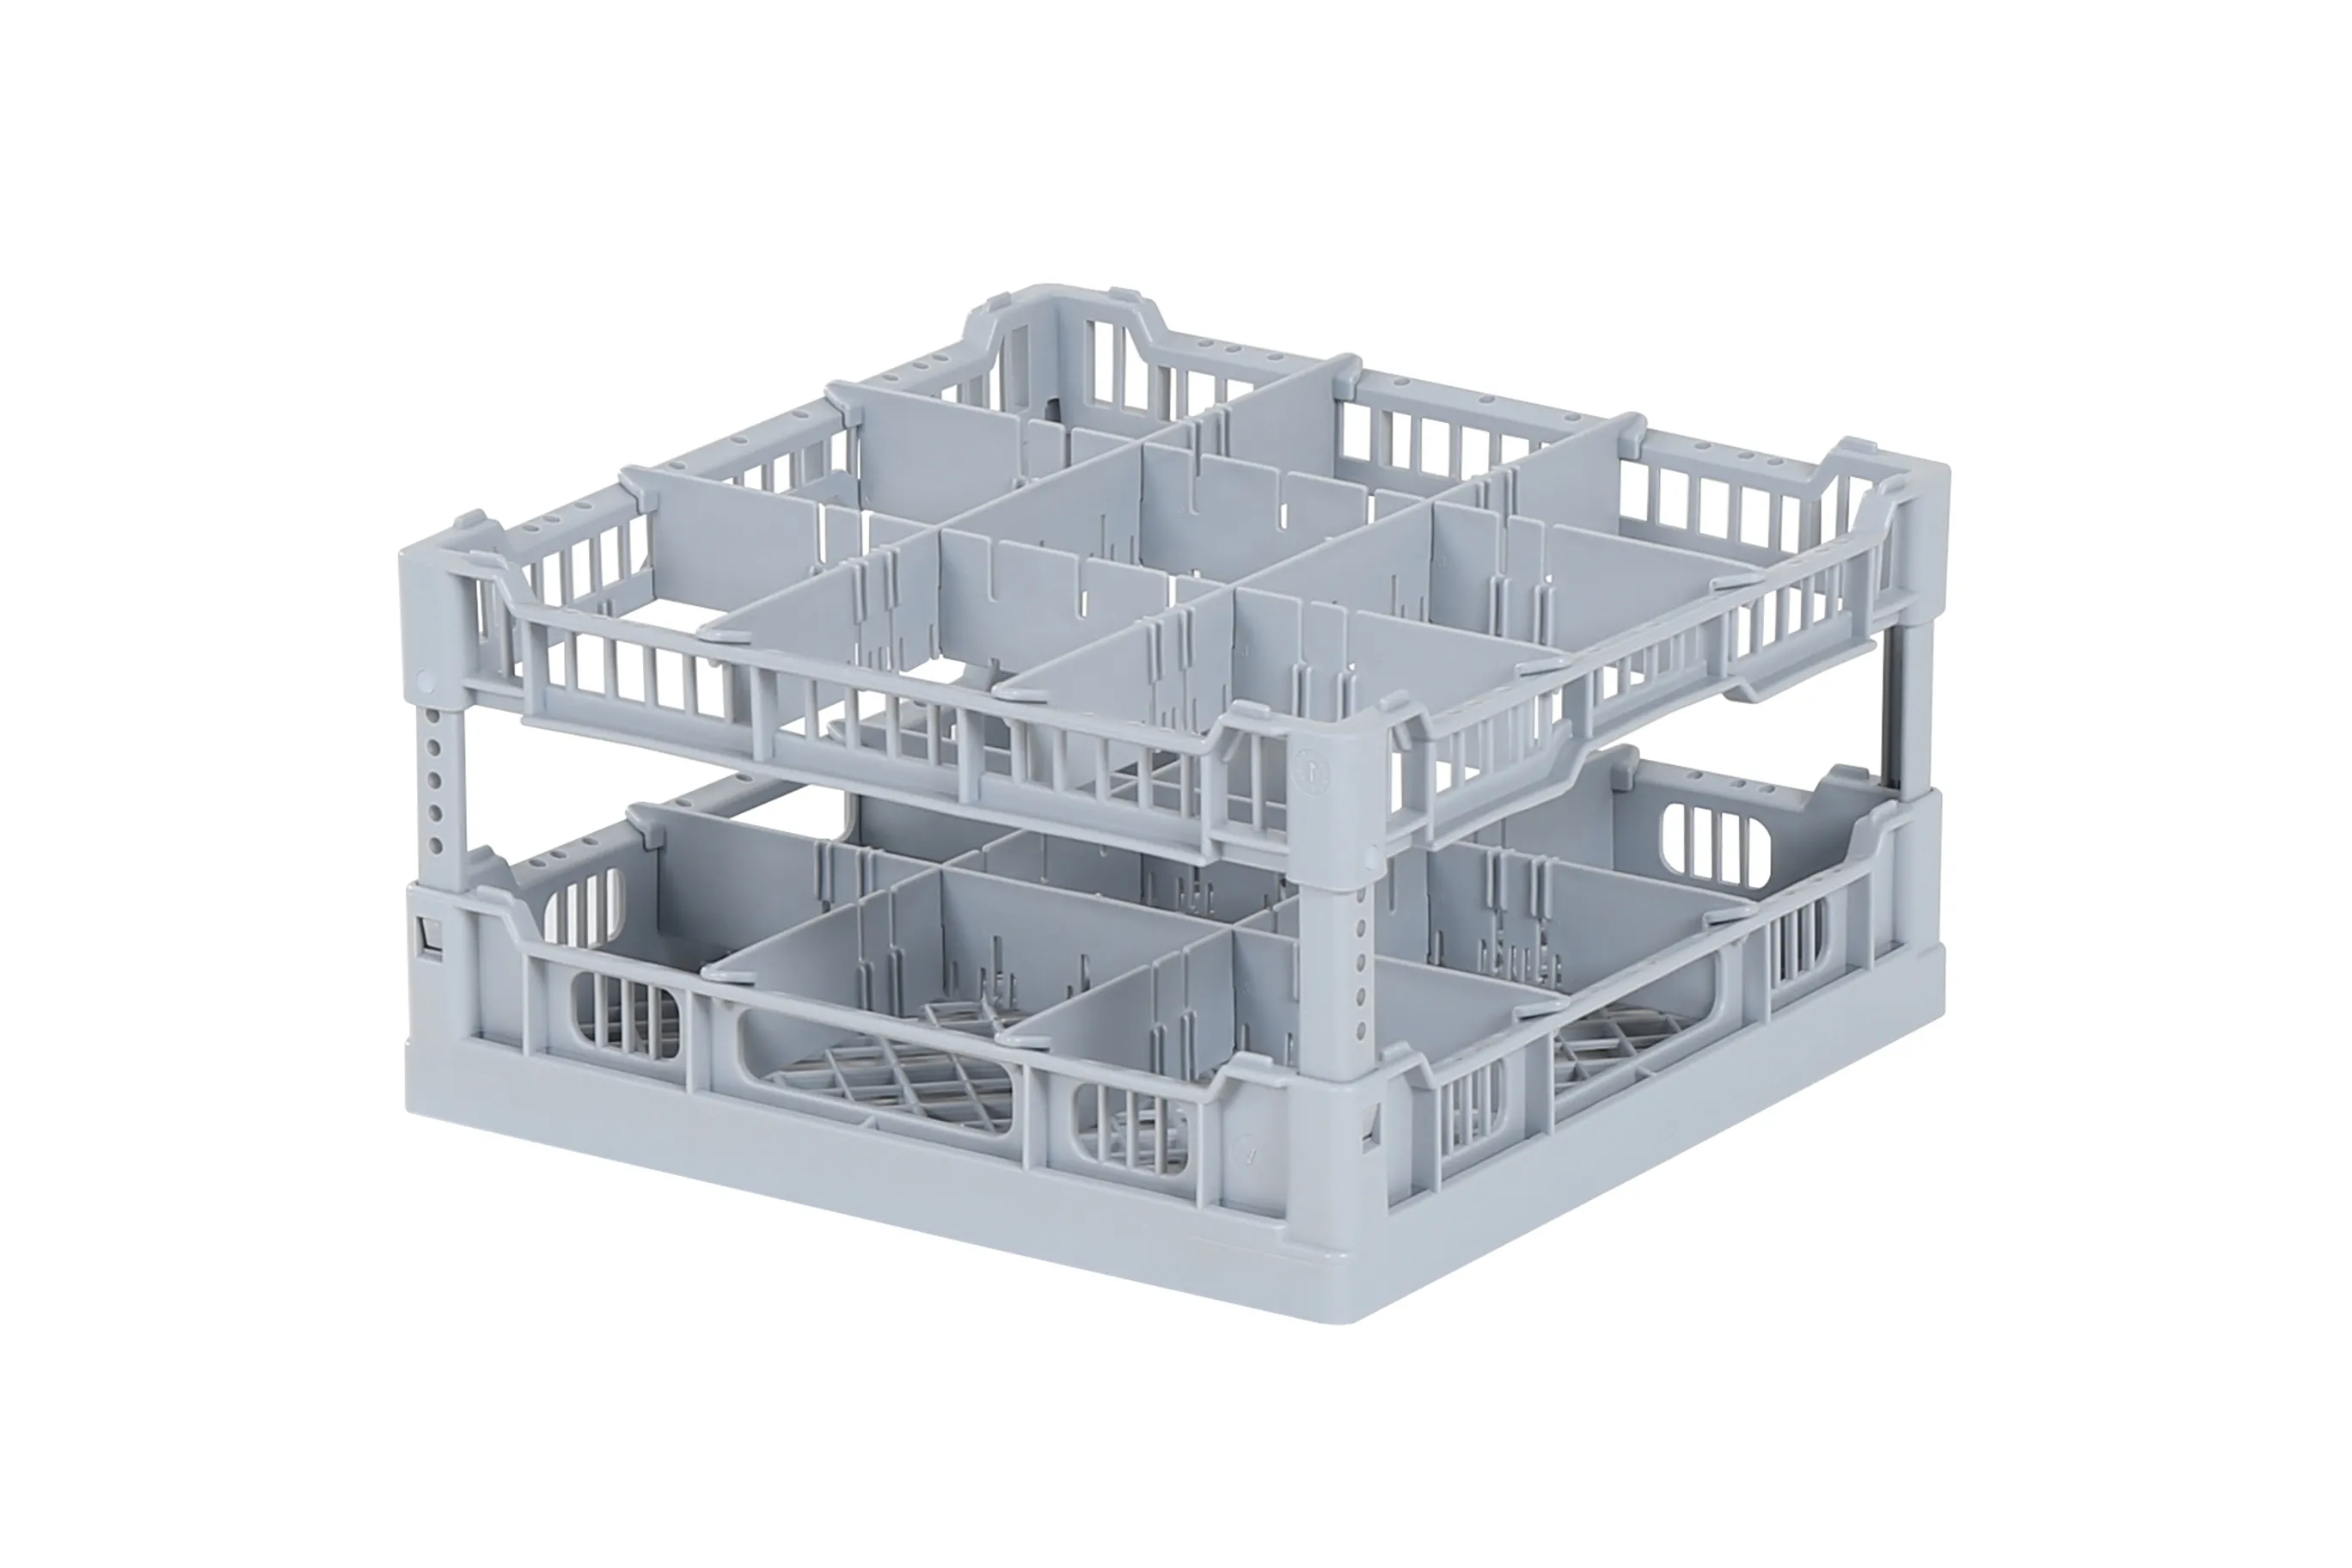 Dishwasher basket 400 x 400 mm - for glass heights from 66 to 190 mm - with 3 x 3 compartmentalization - maximum glass diameter 115mm